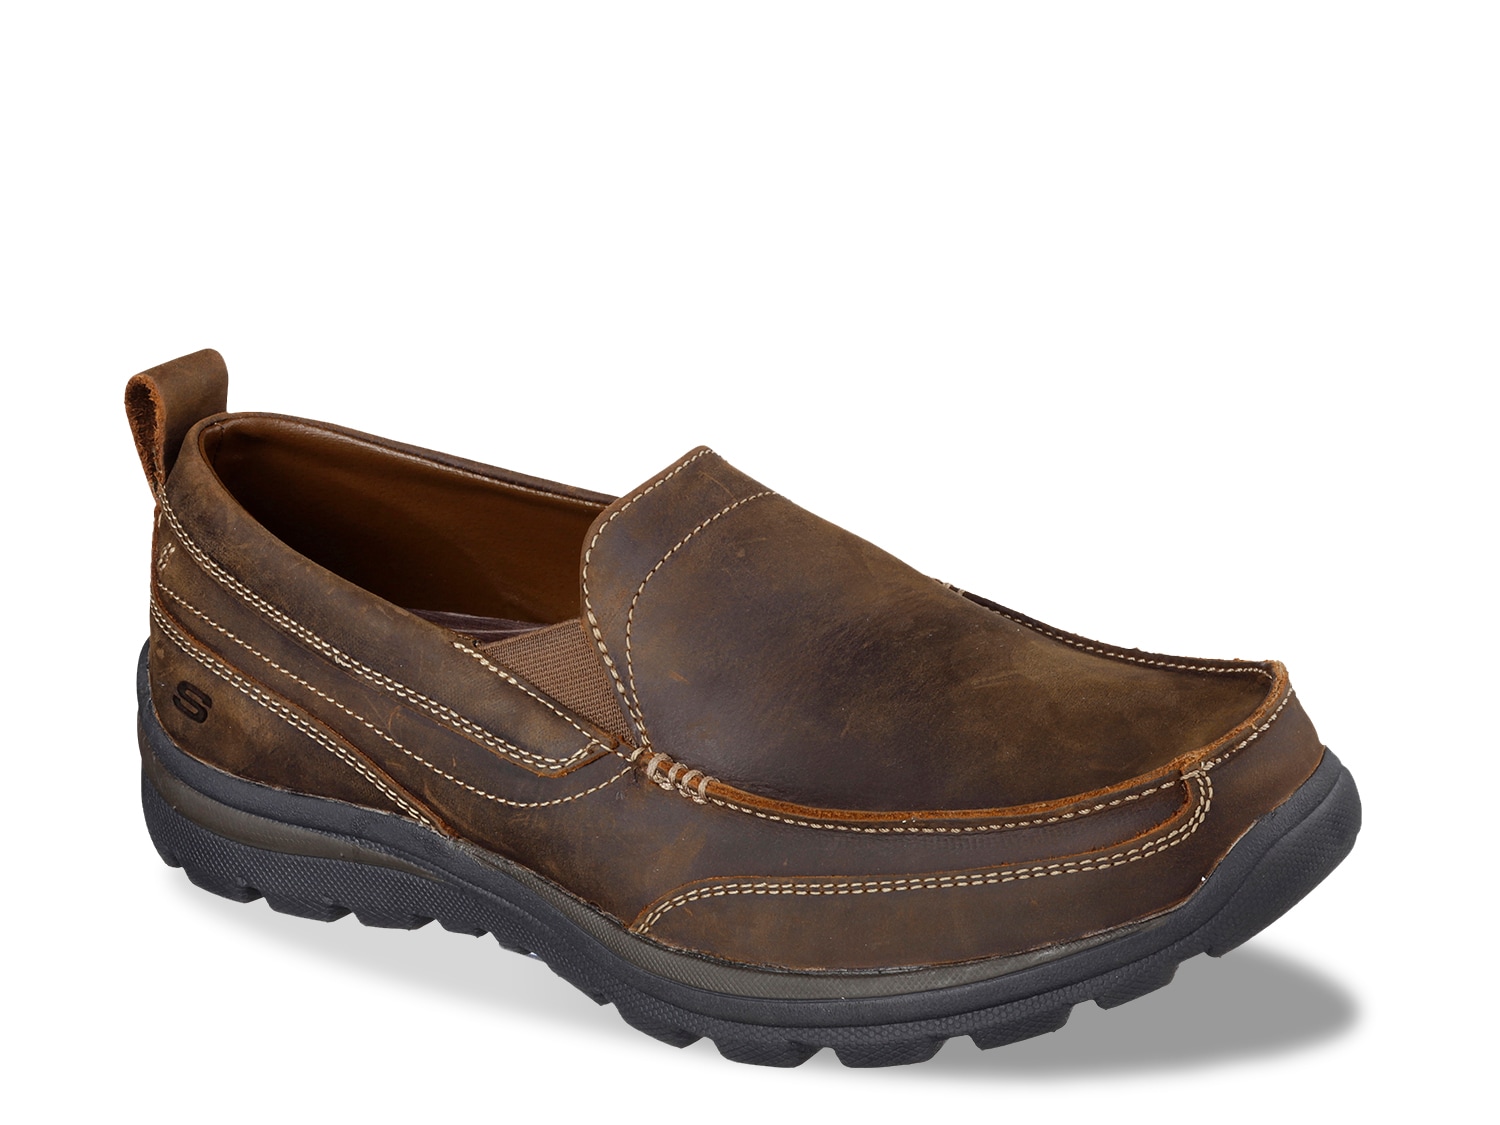 Skechers Relaxed Fit Superior Gains Slip-On - Free Shipping | DSW